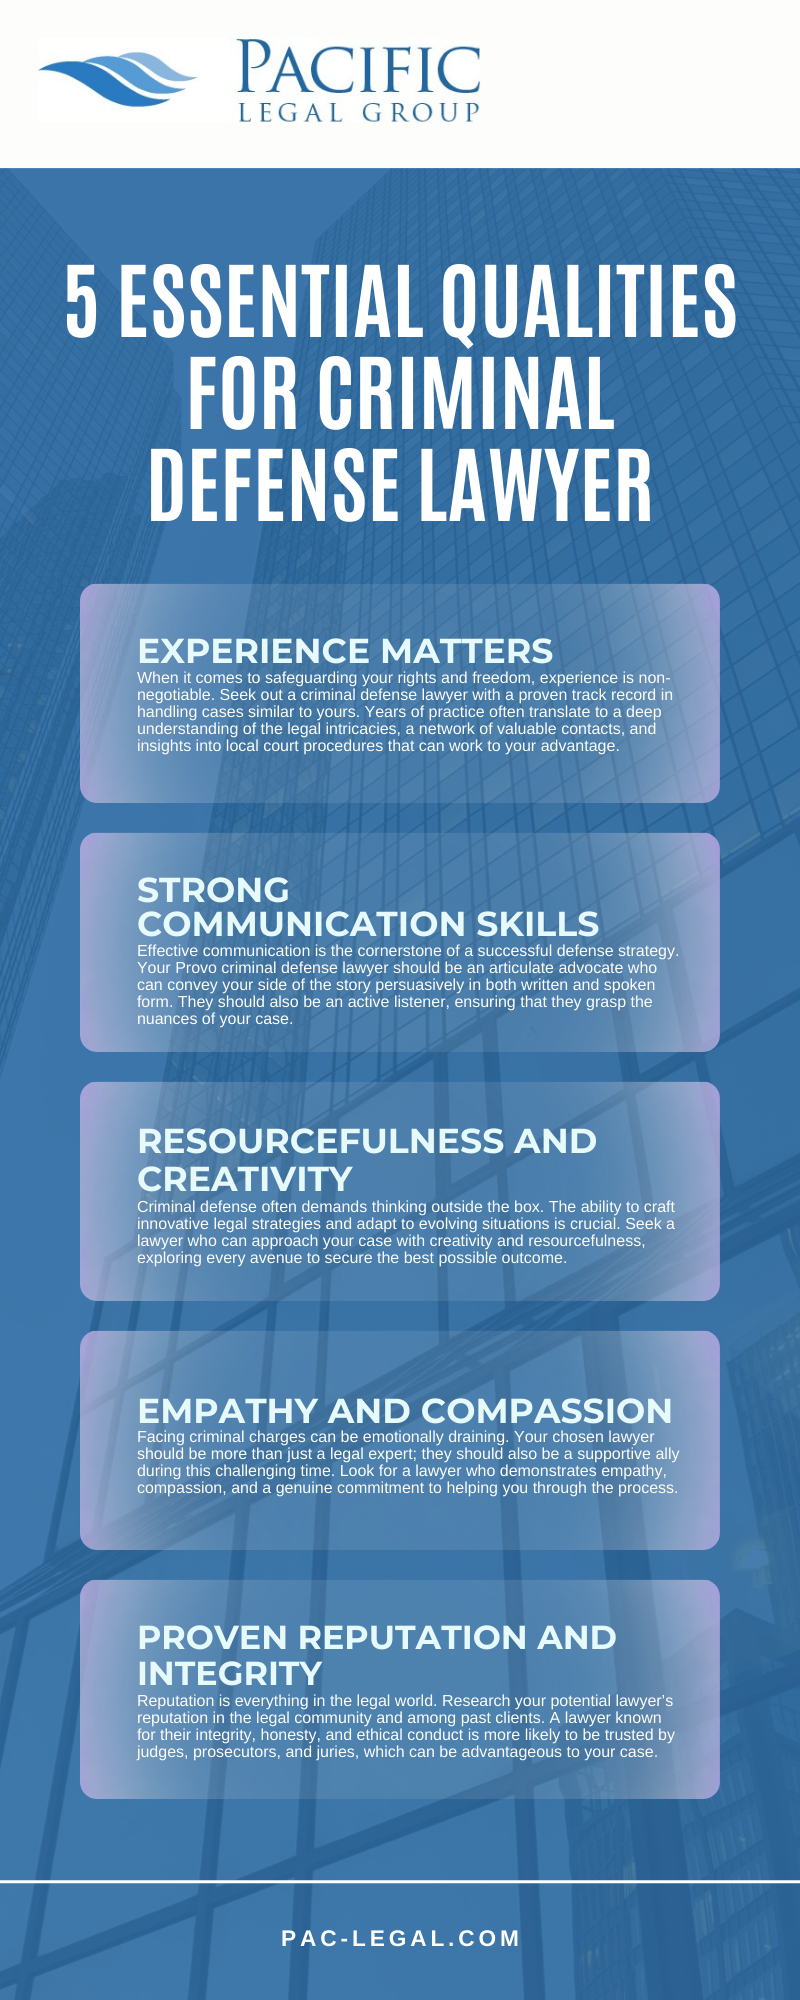 5 Essential Qualities For Criminal Defense Lawyer Infographic